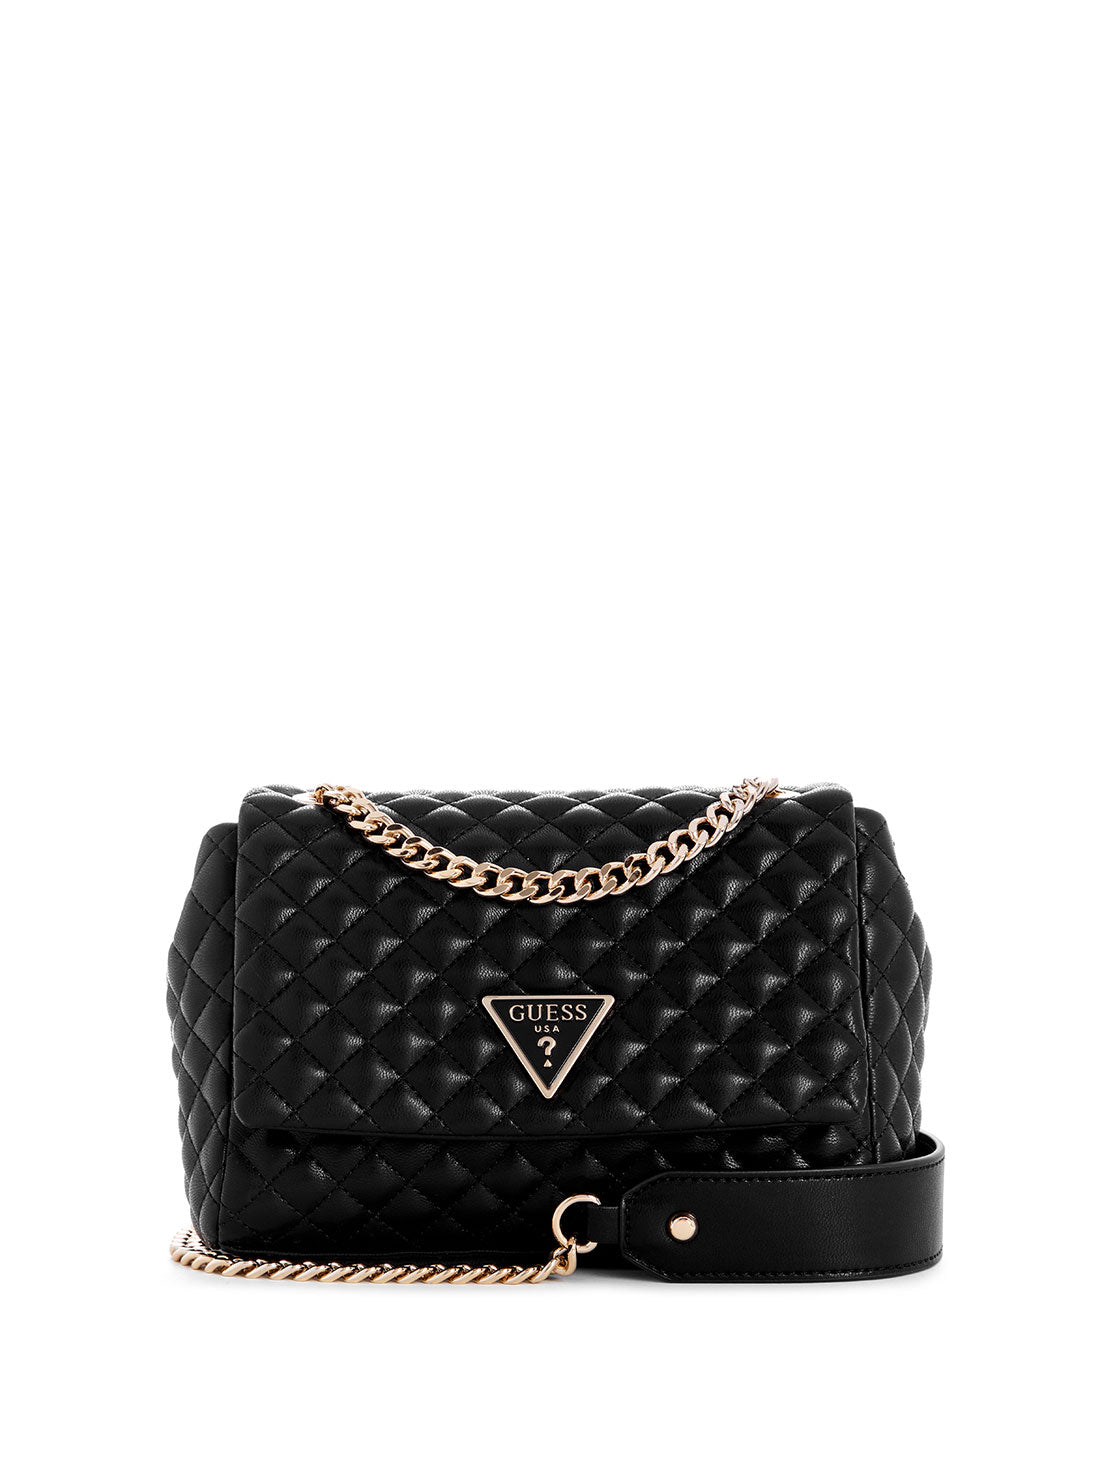 GUESS Black Rianee Crossbody Flap Bag front view